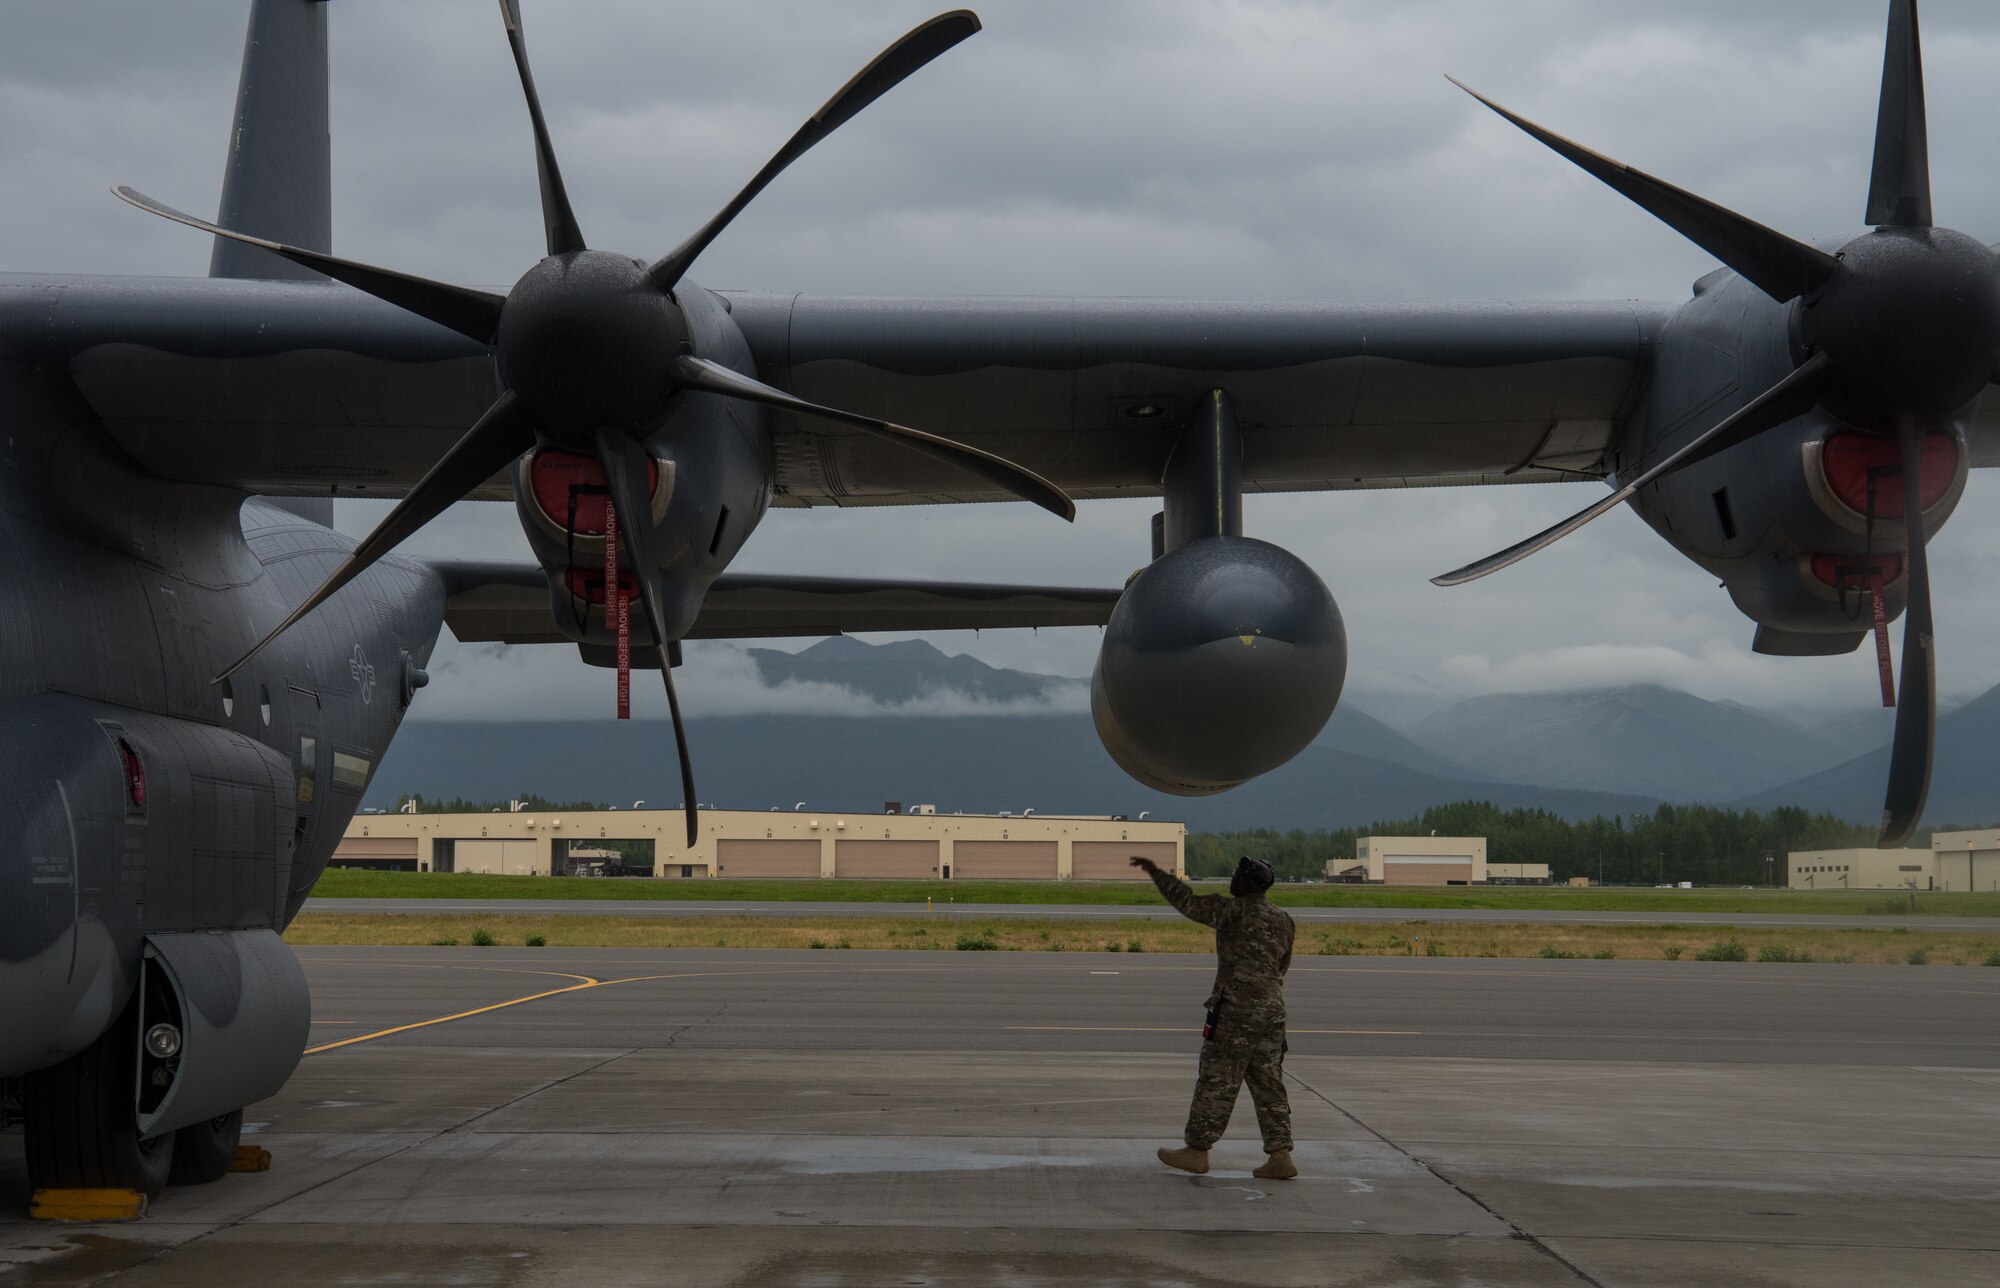 U.S. Air Force Master Sgt. Rick Moore, 353rd Special Operations Maintenance Squadron productions superintendent, performs a pre-flight inspection on a C-130J Super Hercules from Kadena Air Force Base, Japan, during Red Flag-Alaska 18-3 at Joint Base Elmendorf-Richardson, Alaska, Aug. 13, 2018. RF-A serves as an ideal platform for international engagement and the exercise has a long history of including allies and partners, ultimately enabling all involved to exchange tactics, techniques and procedures while improving interoperability.